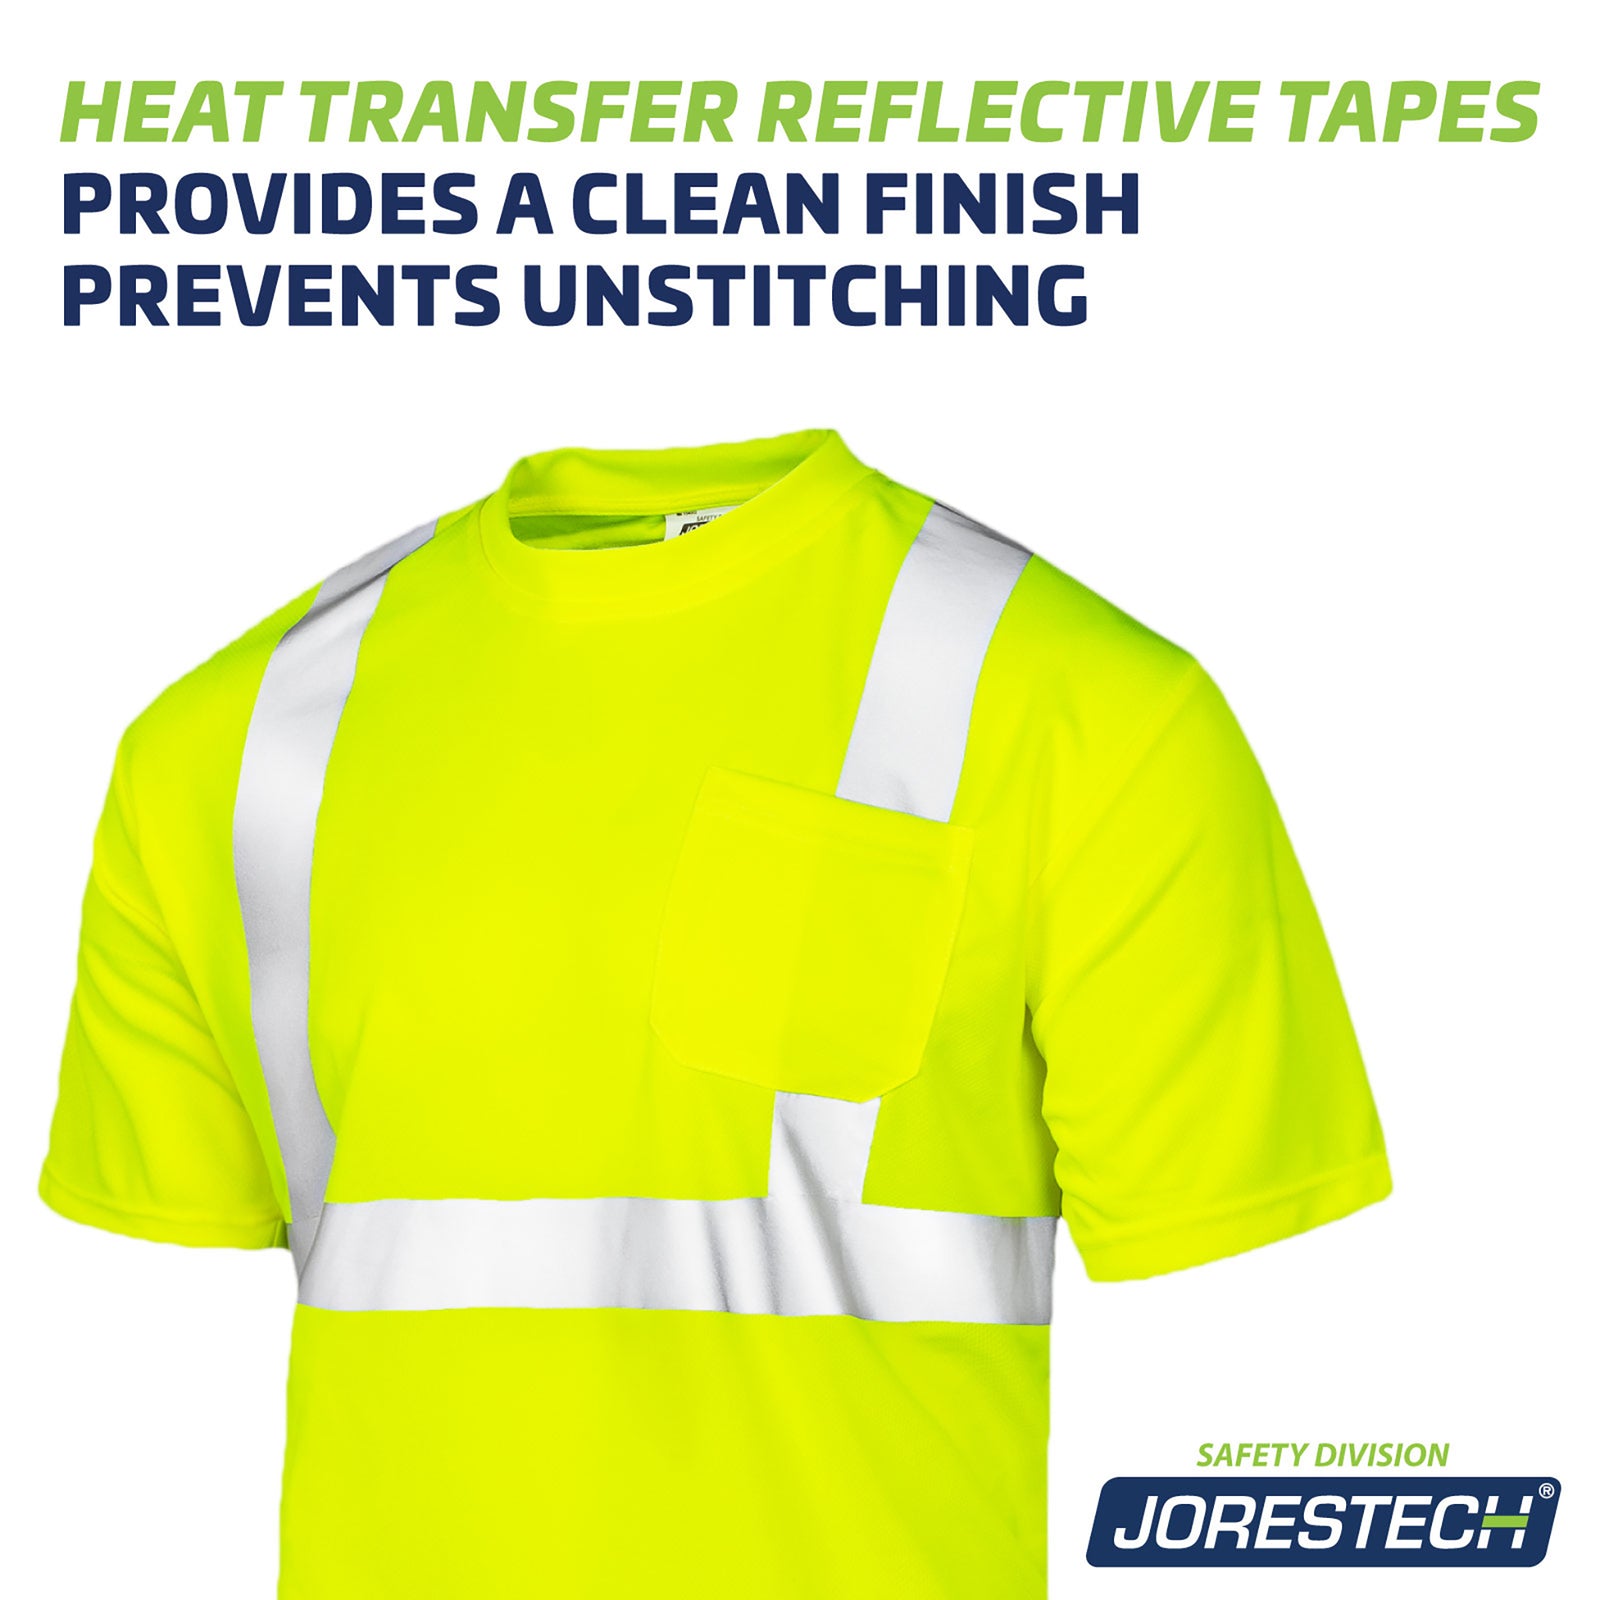 Close up to show the heat transfer strips on the hi vis yellow safety shirt. Text reads: heat transfer reflective tapes provides a clean finish, prevents unstitching